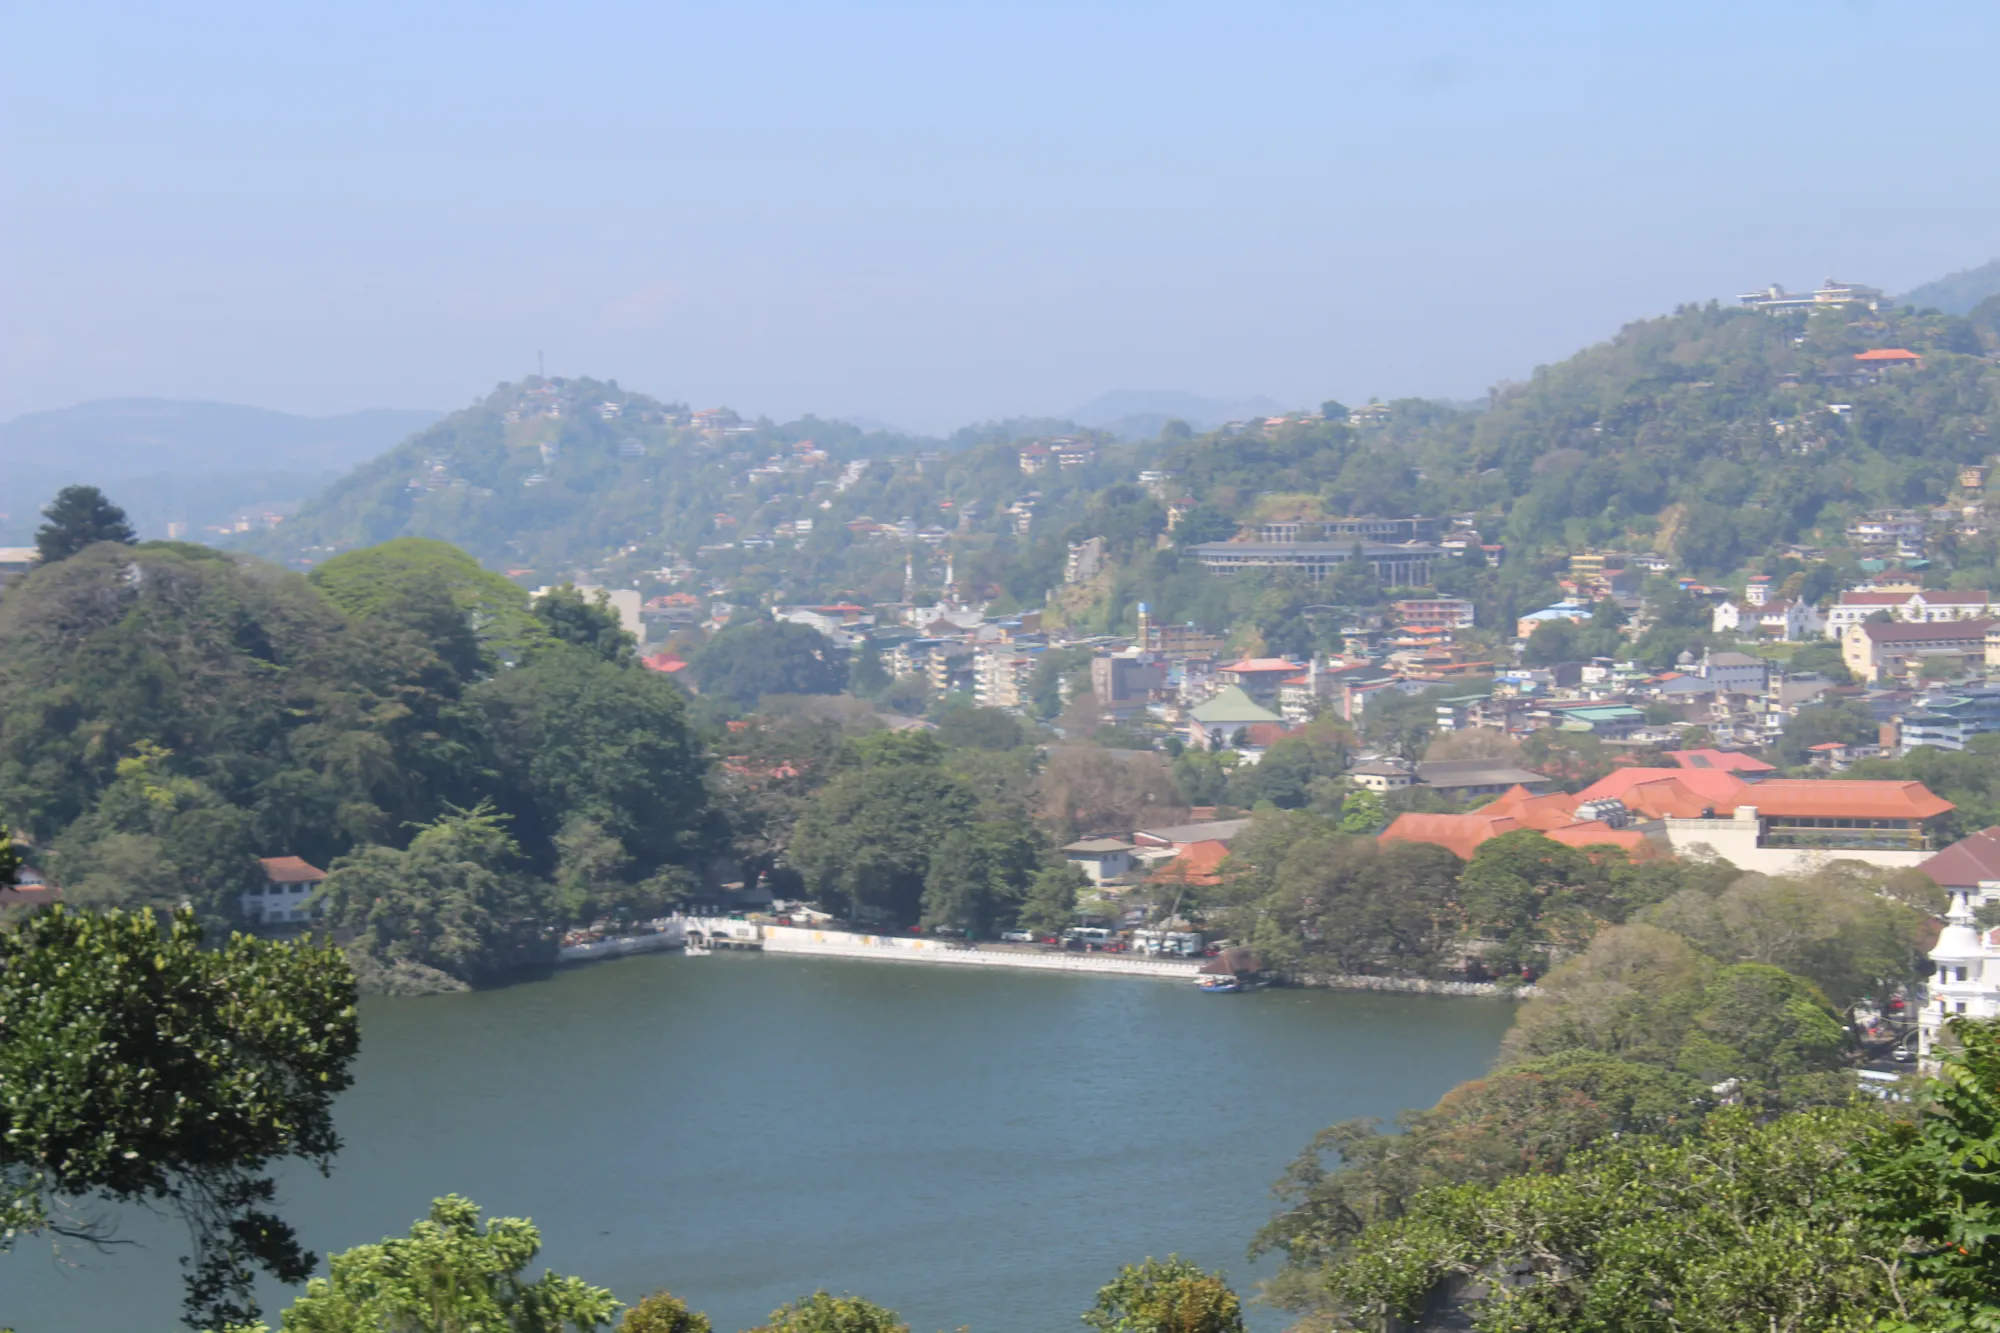 Kandy city and the lake seen from a view point at Udawattekele Forest.